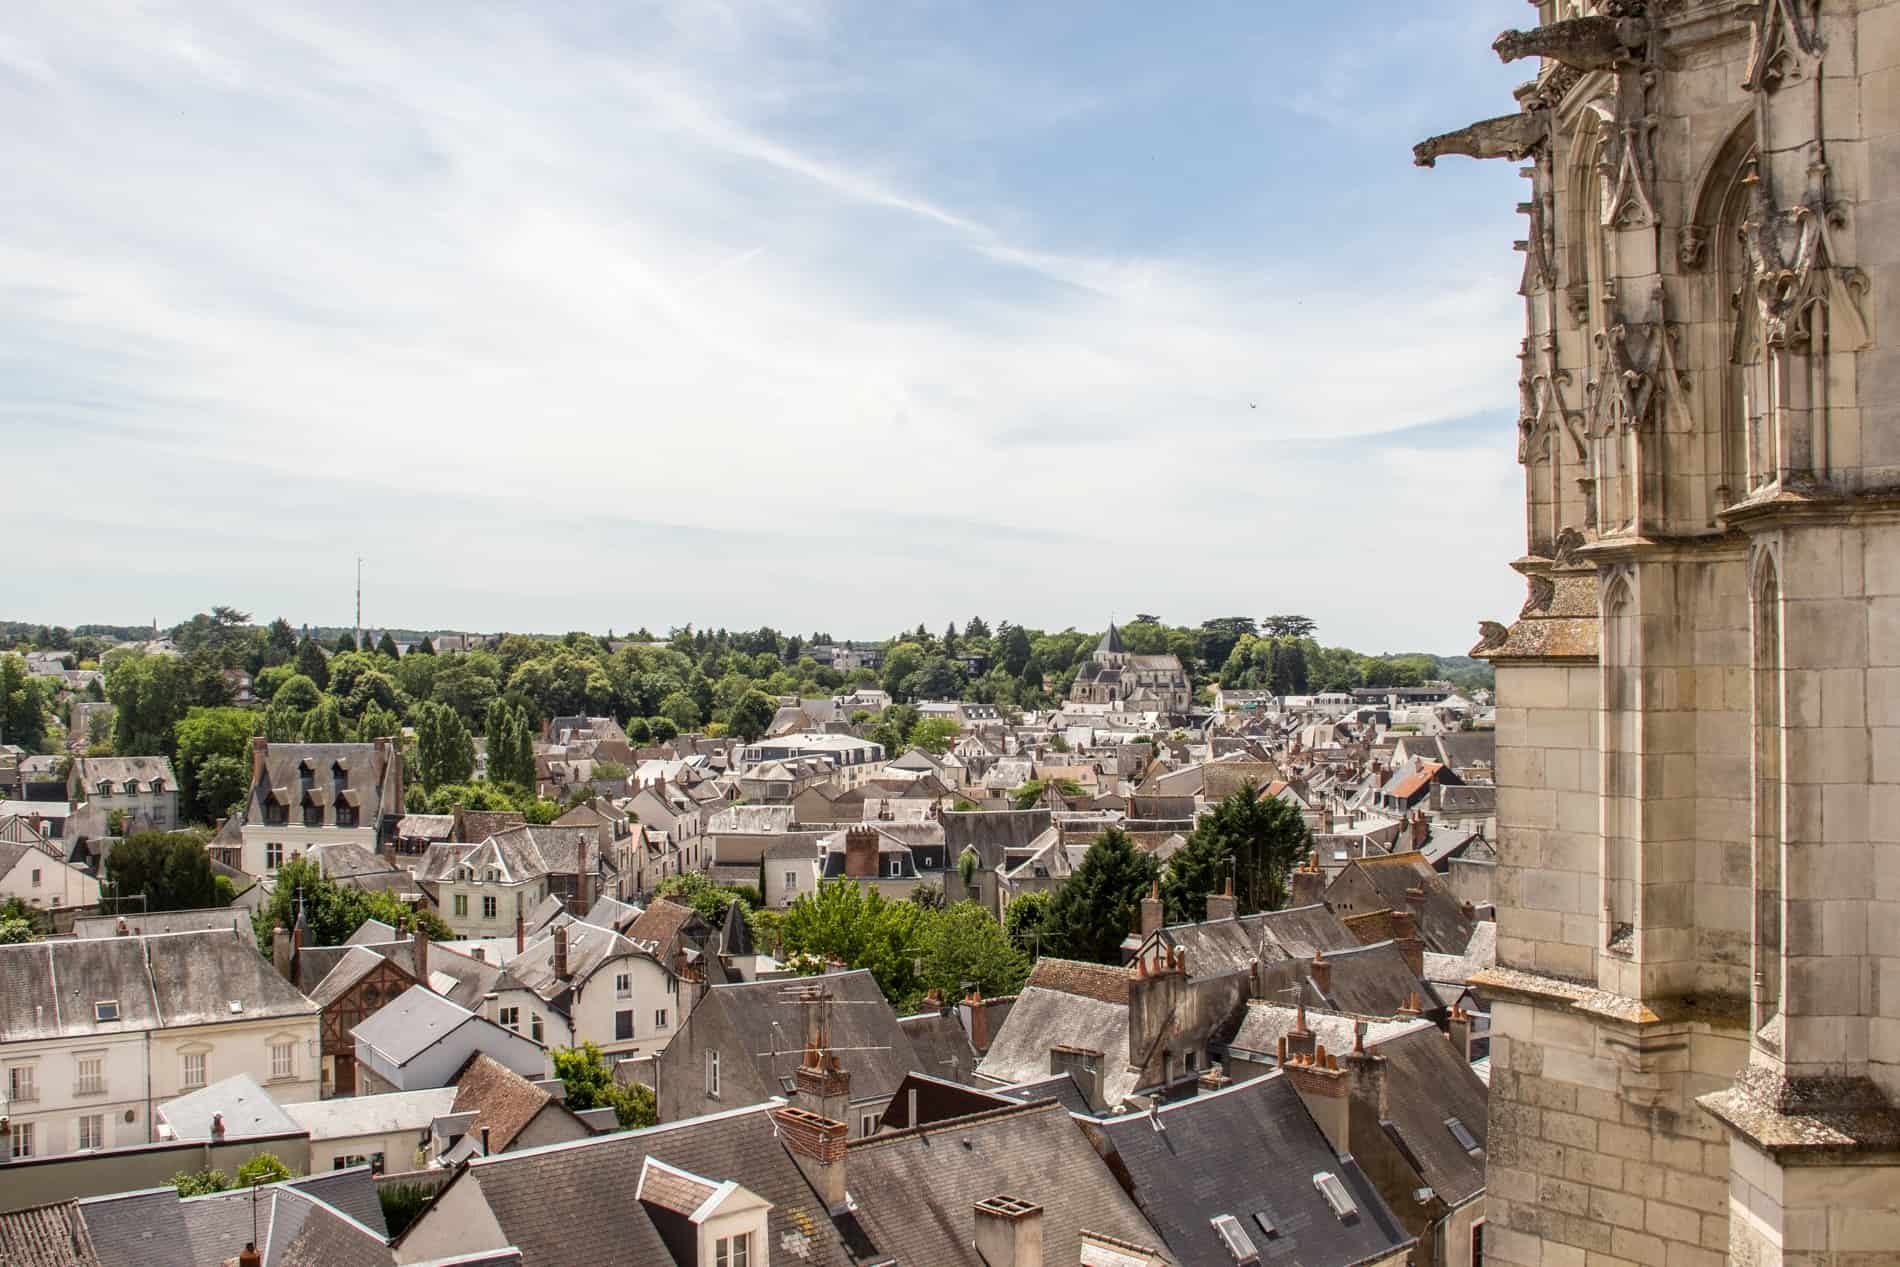 View of the rectangular houses of Amboise from the ramparts of Château Royal d'Amboise in the Loire Valley.